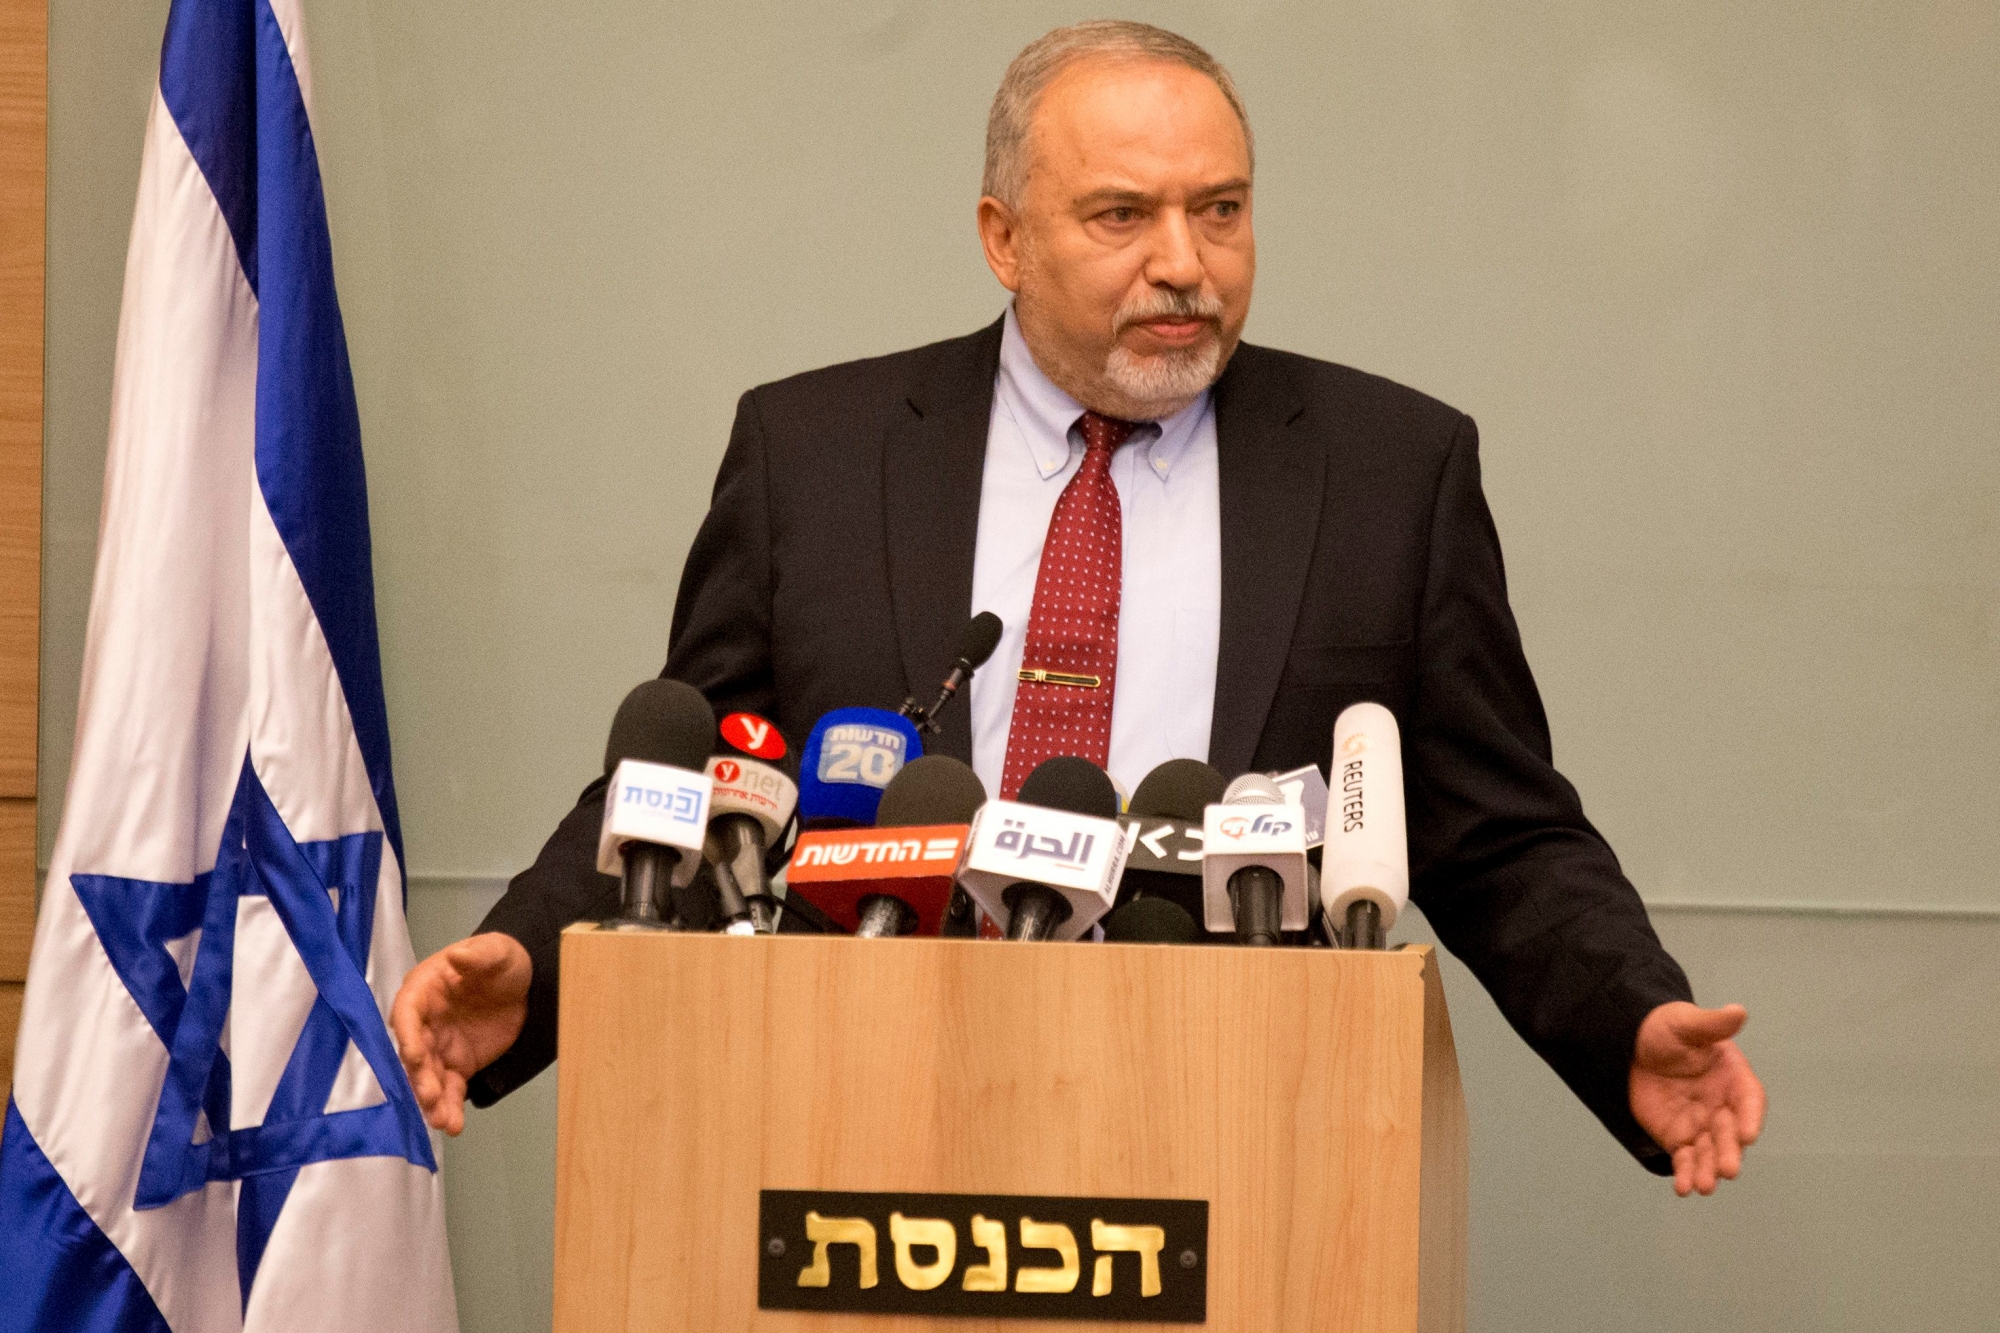 Israeli Defense Minister Avigdor Lieberman delivers a statement at the Knesset, Israel's Parliament, in Jerusalem, Wednesday, Nov. 14, 2018. Lieberman announced his resignation Wednesday over the Gaza cease-fire, making early elections likely. (AP Photo/Ariel Schalit) Israel Lieberman